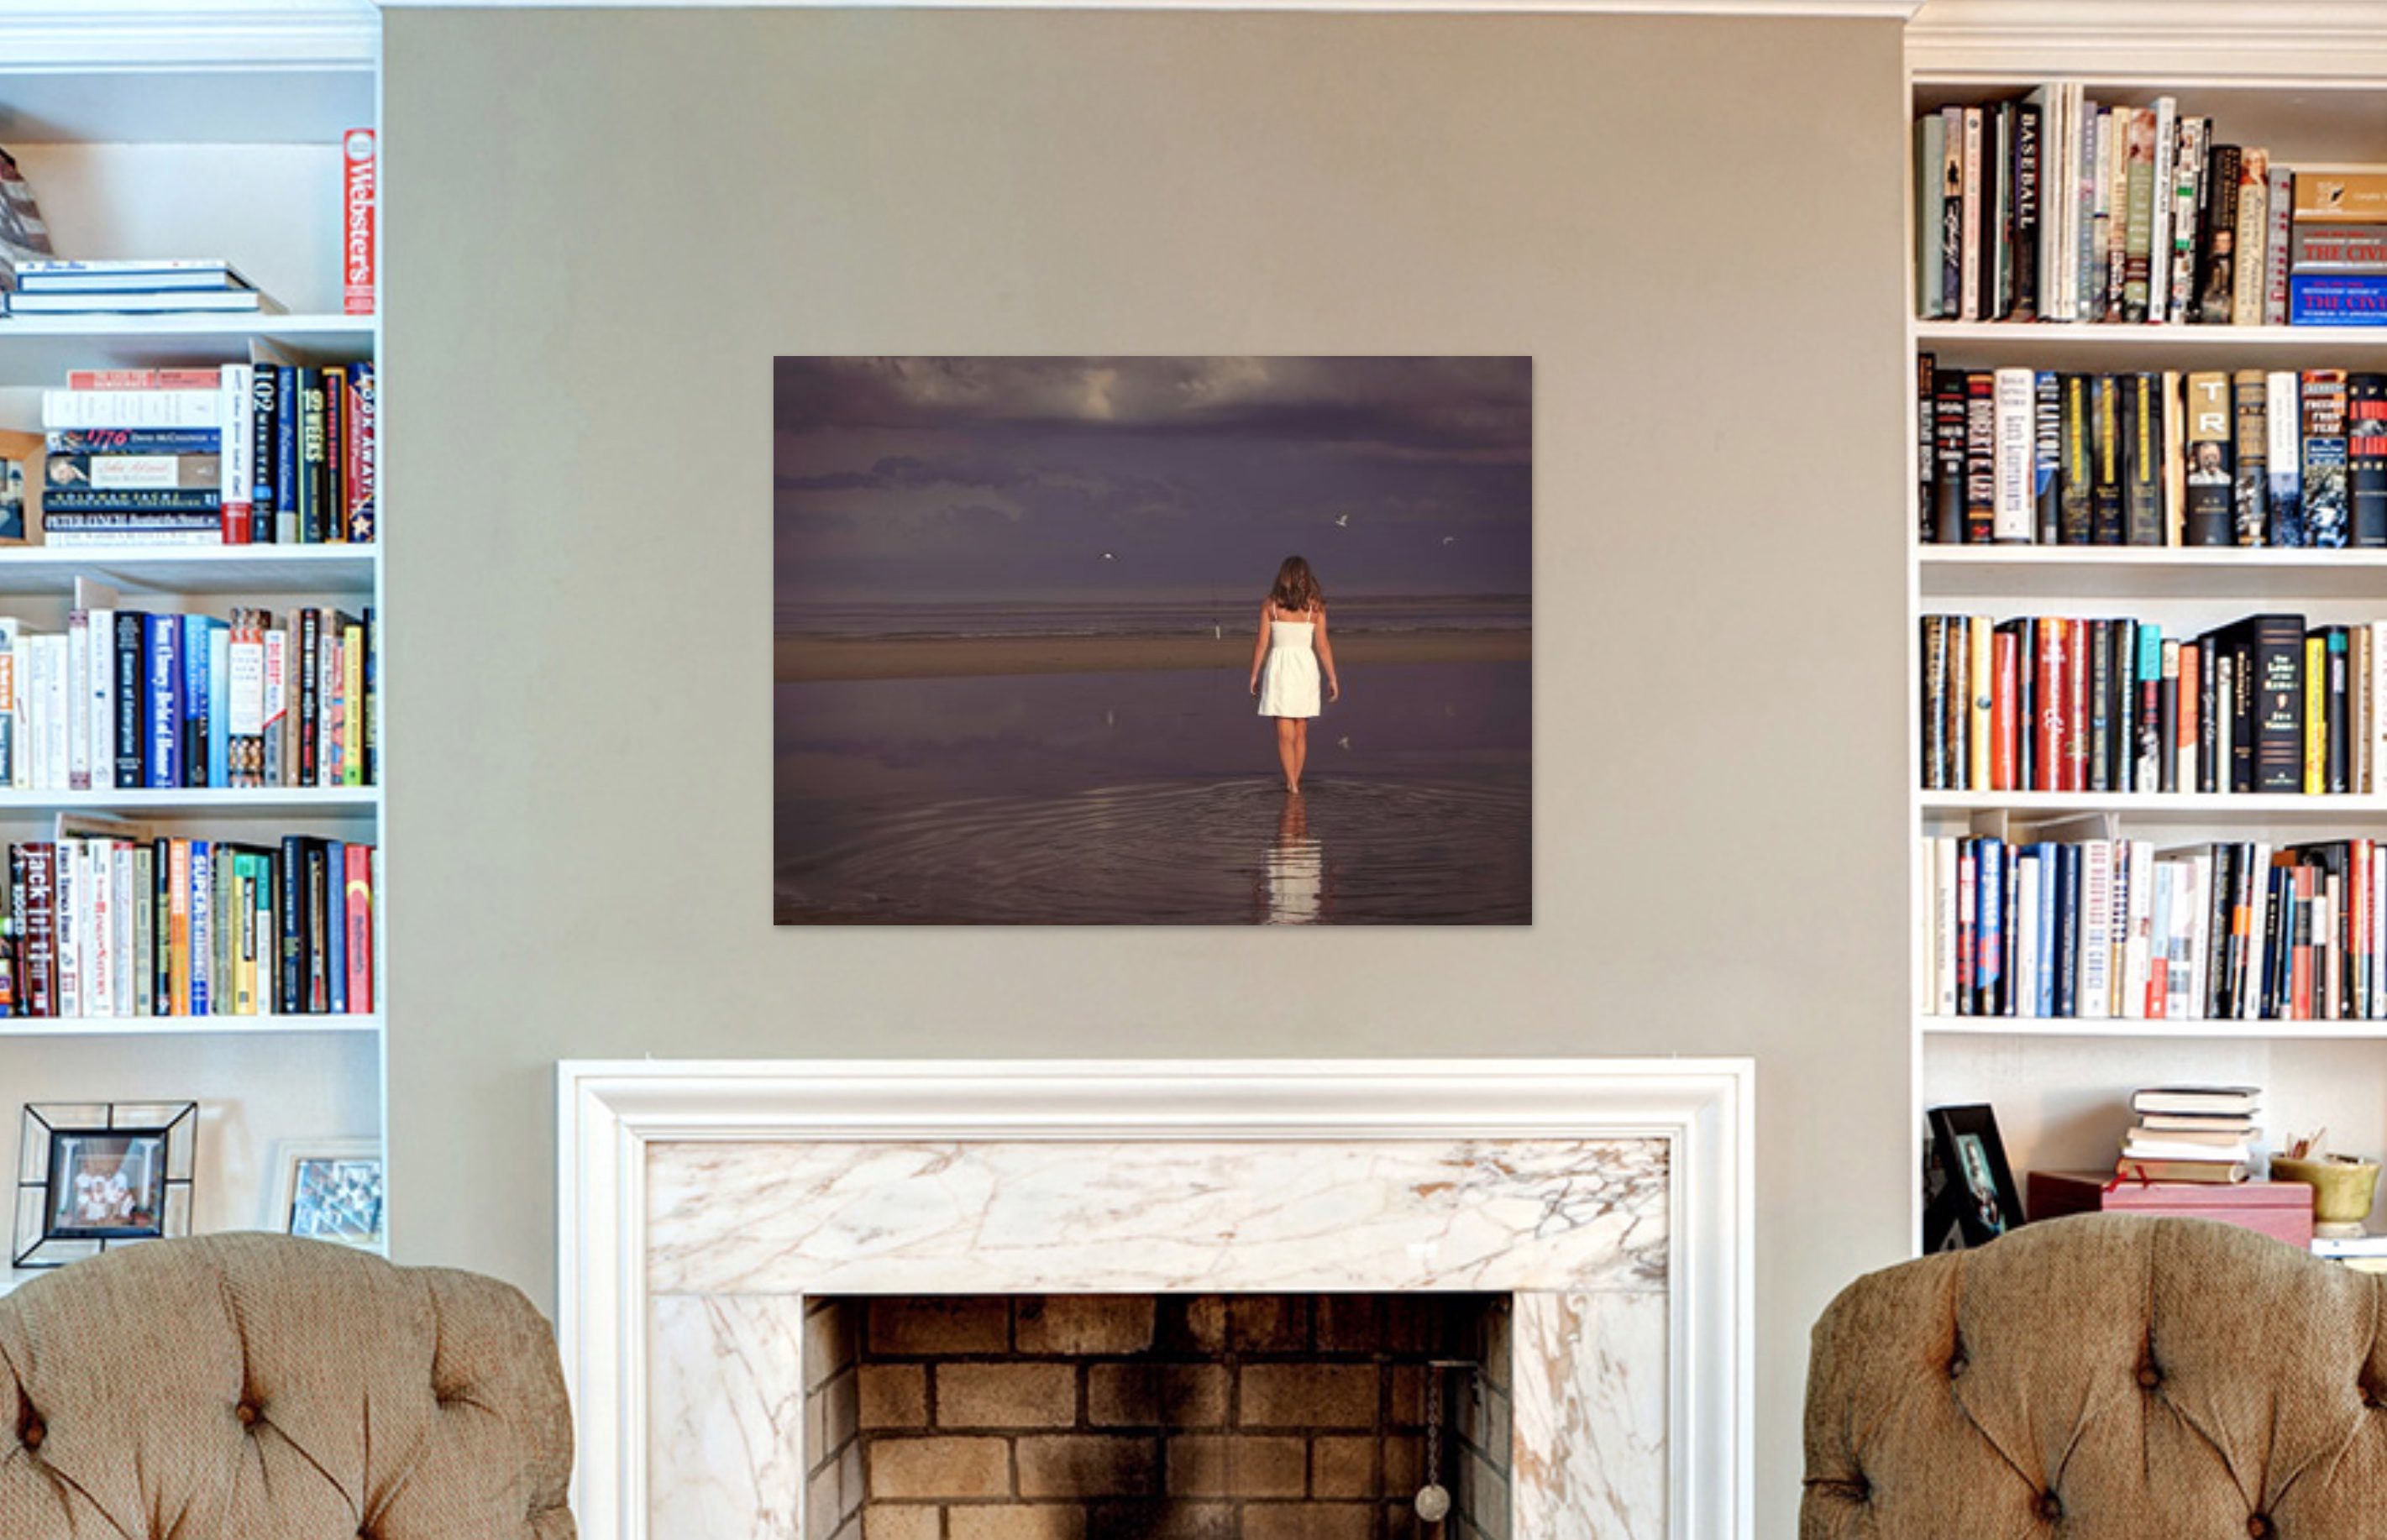 Photography on walls in home